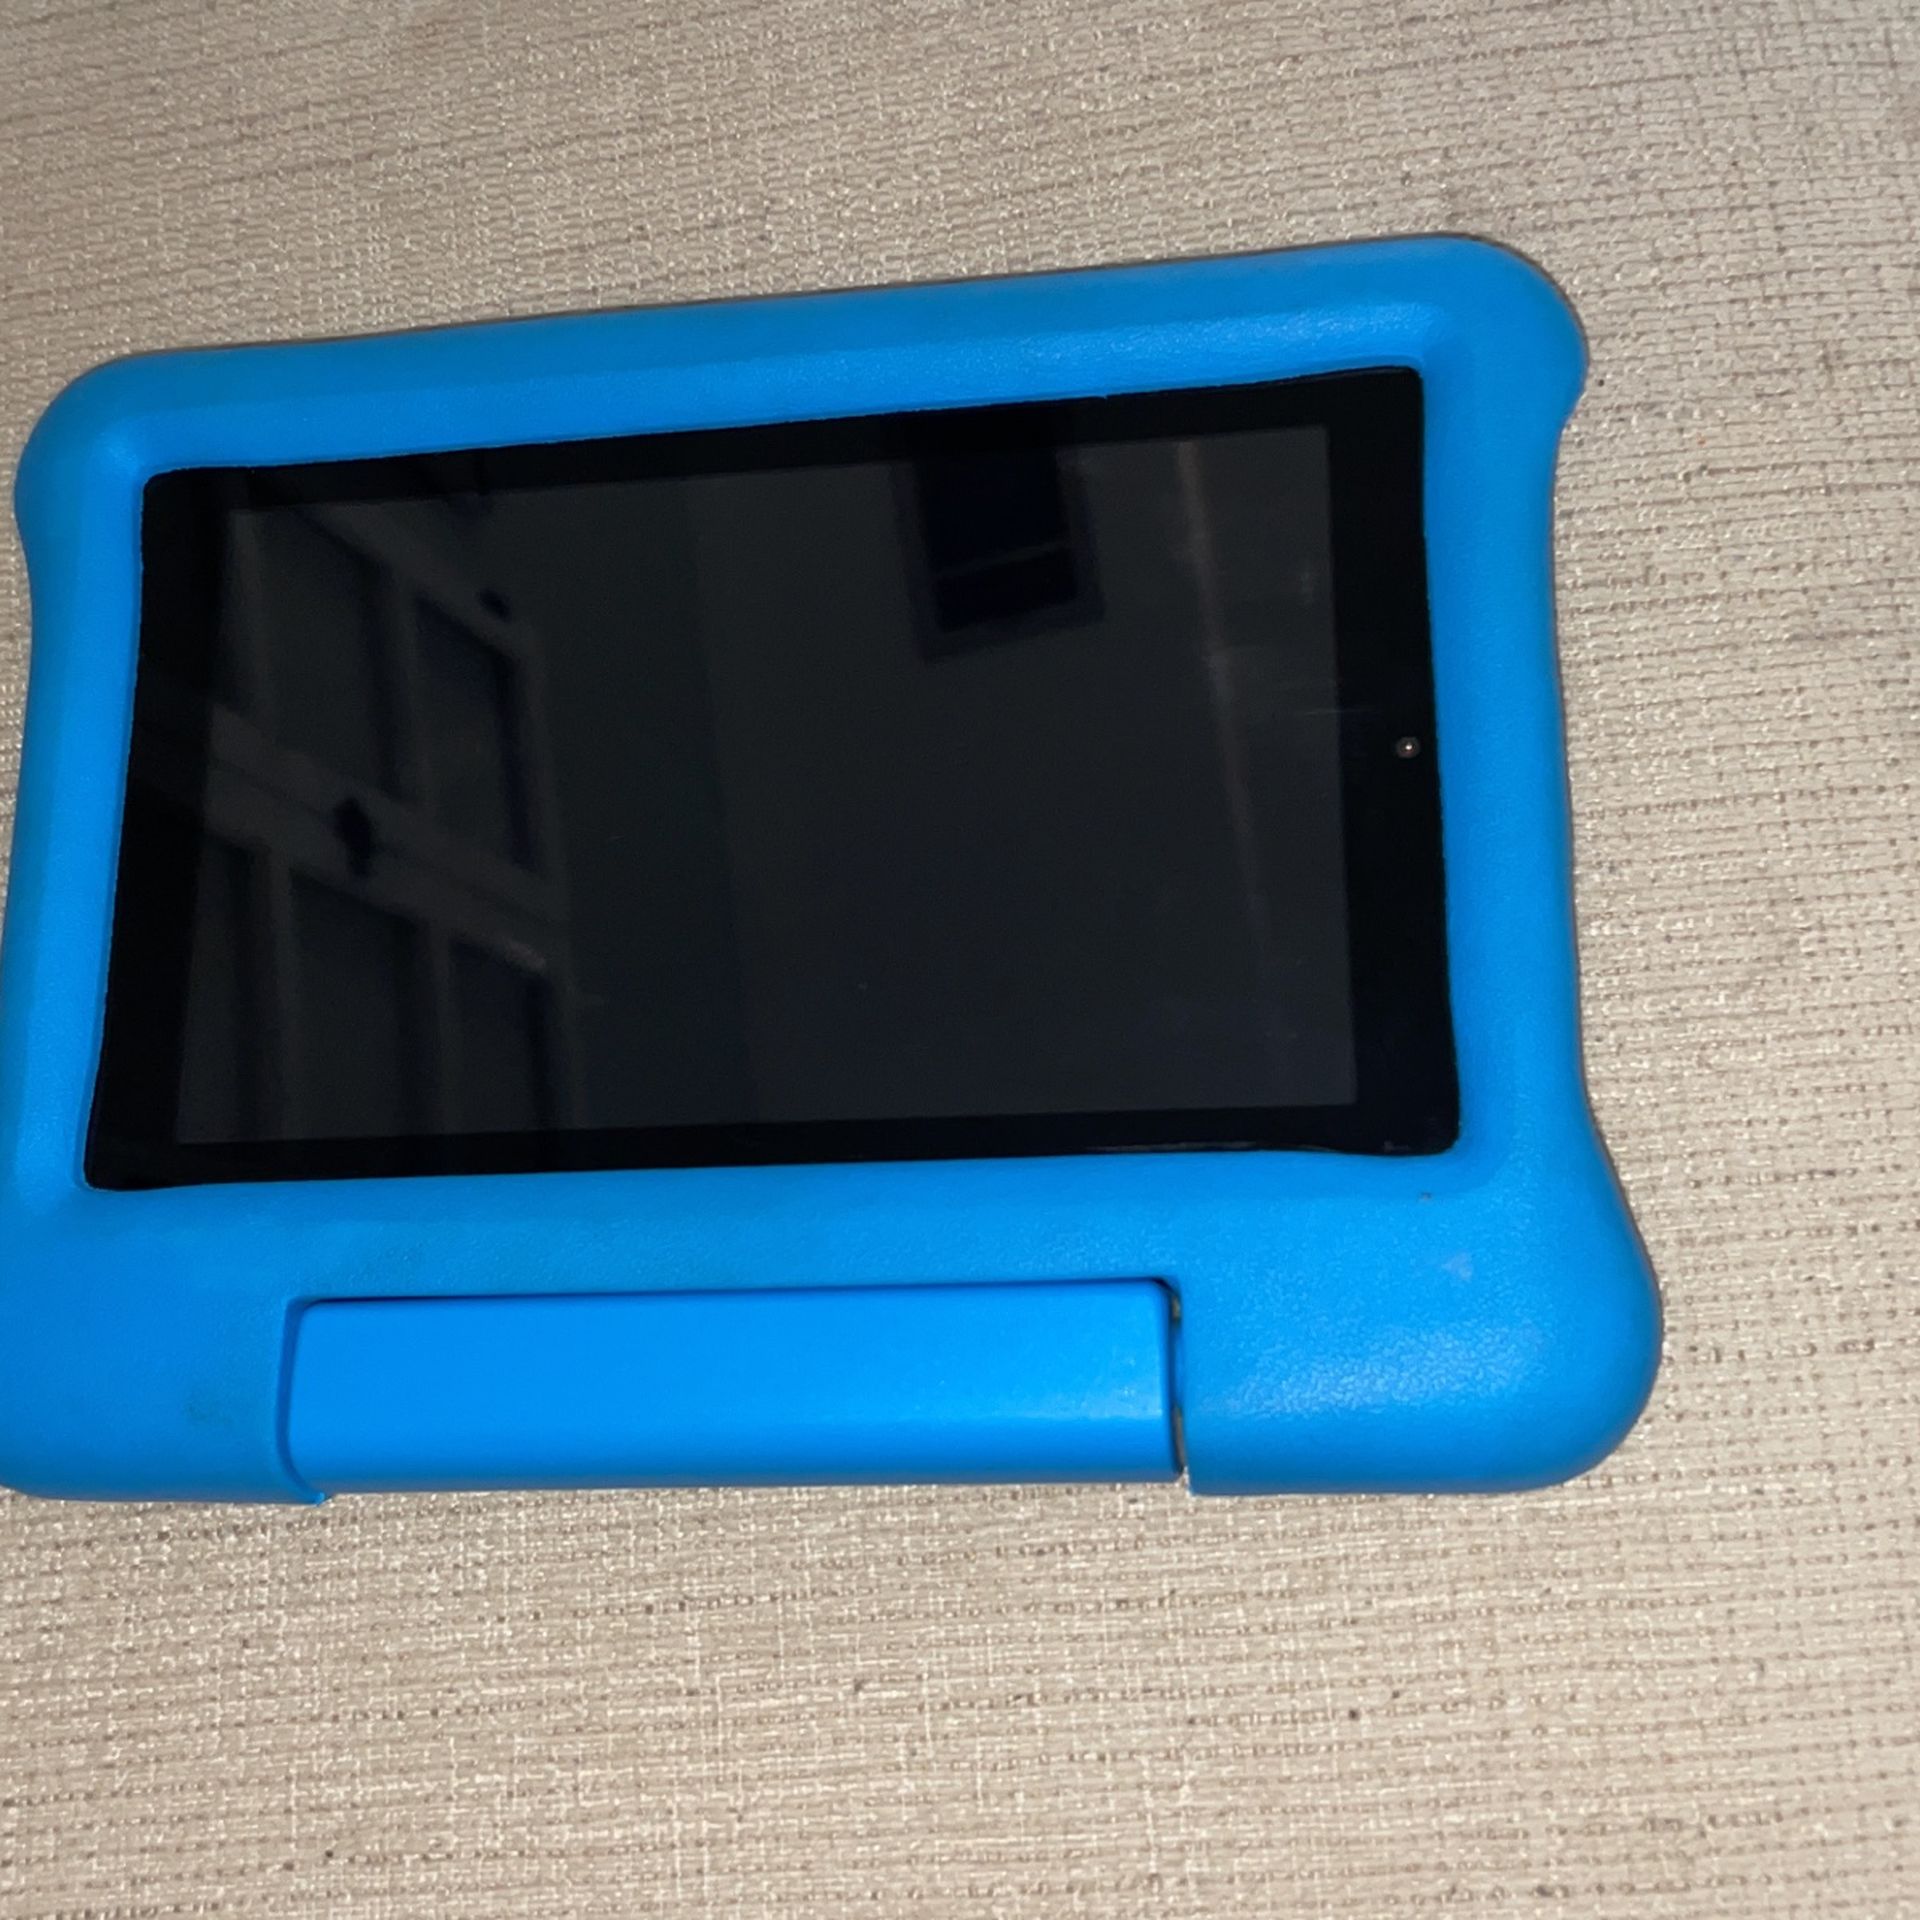 Amazon Fire 7" Kids Edition Tablet (9th Generation, Blue)